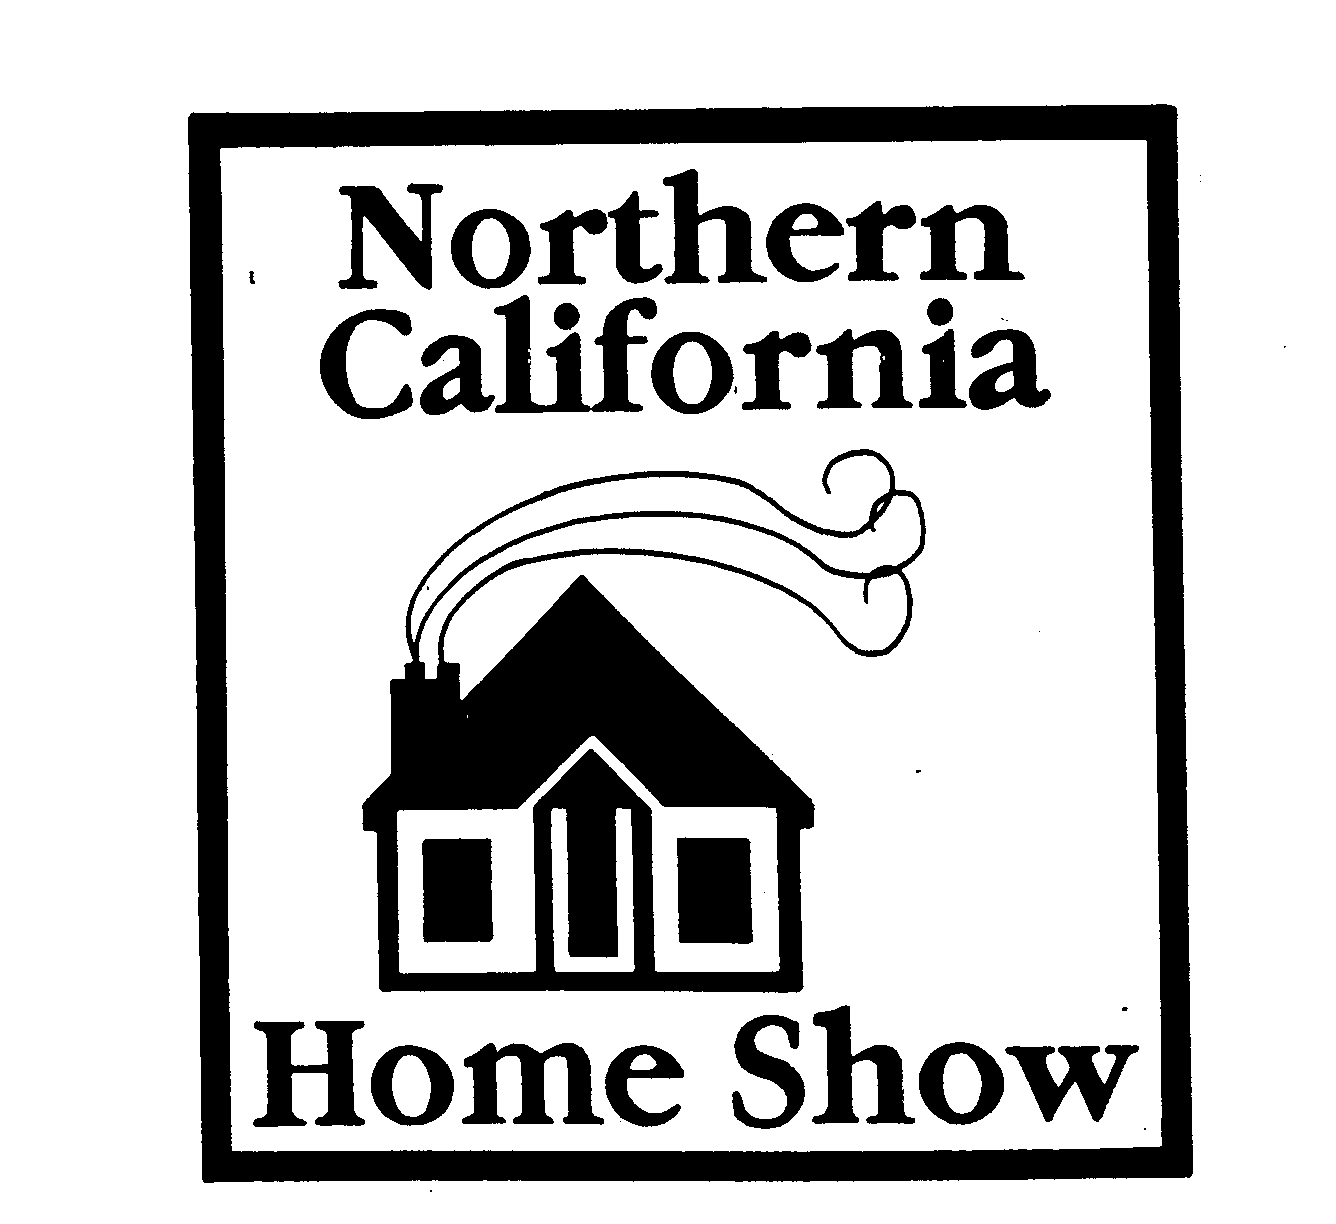  NORTHERN CALIFORNIA HOME SHOW